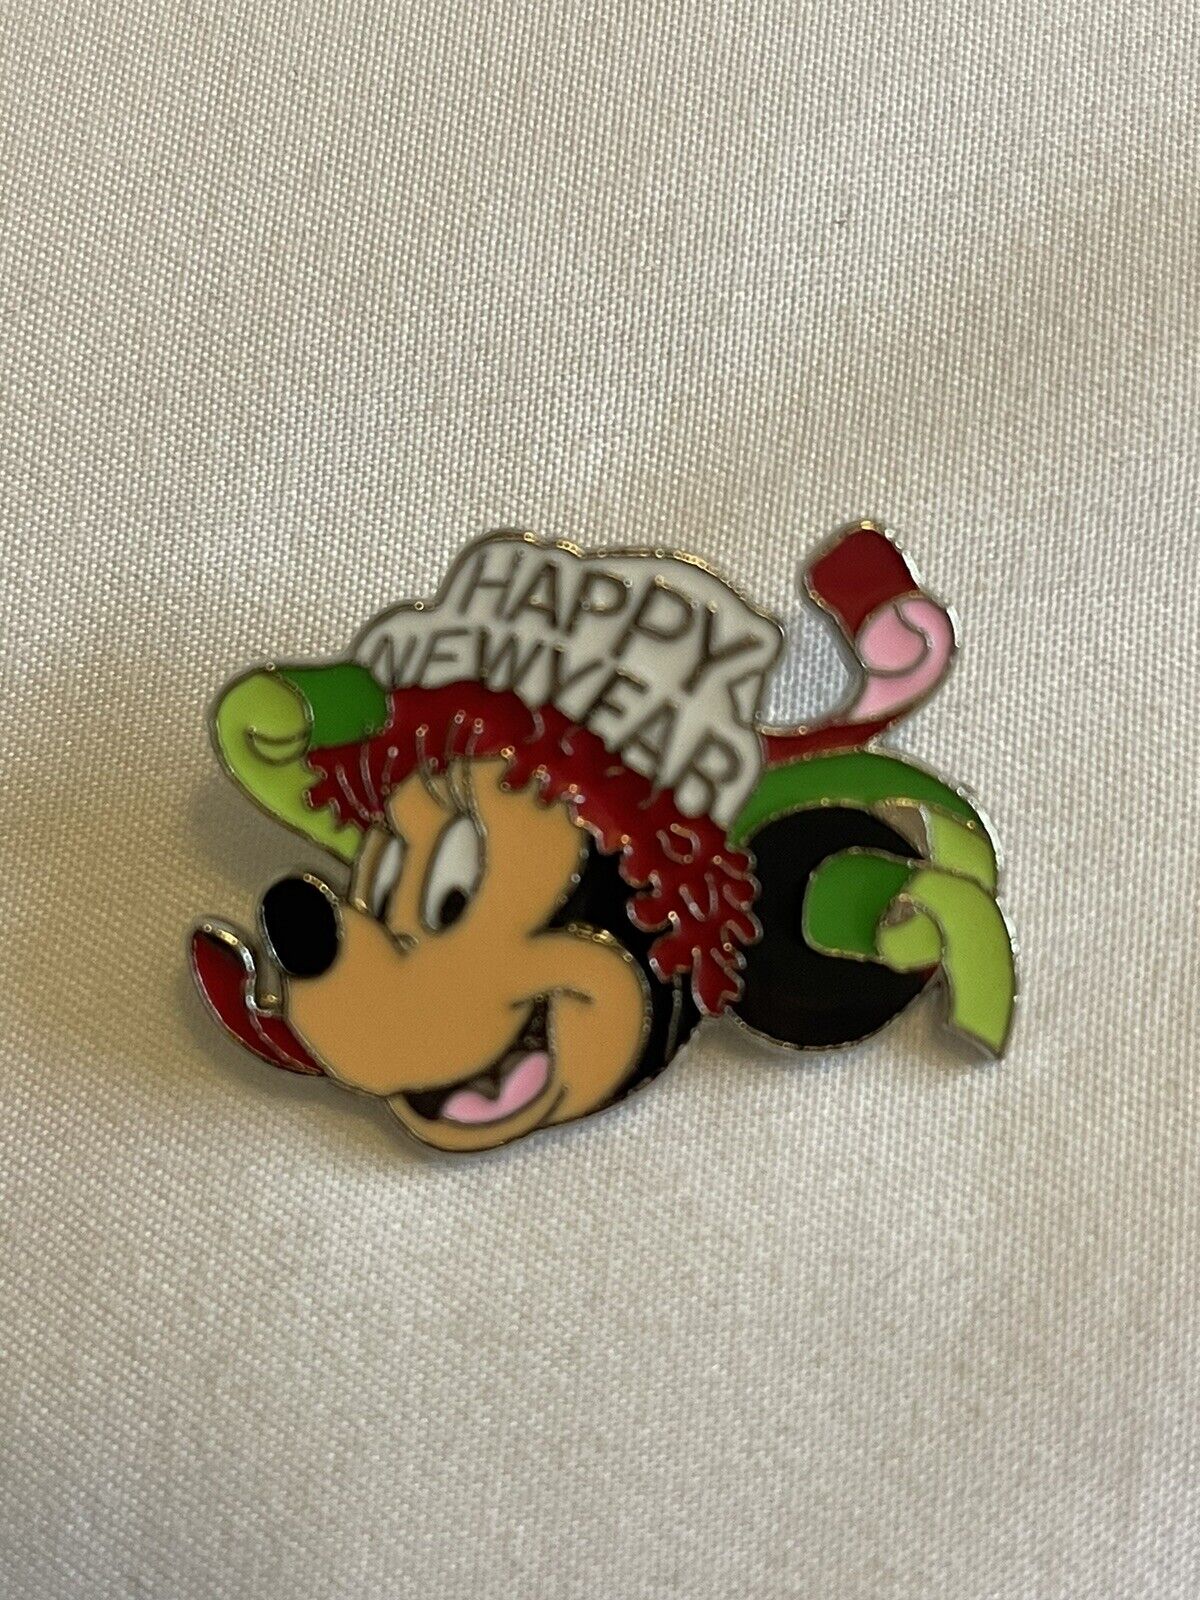 Disney Happy New Year Minnie Mouse 2009 Limited Edition 500 Trading Pin